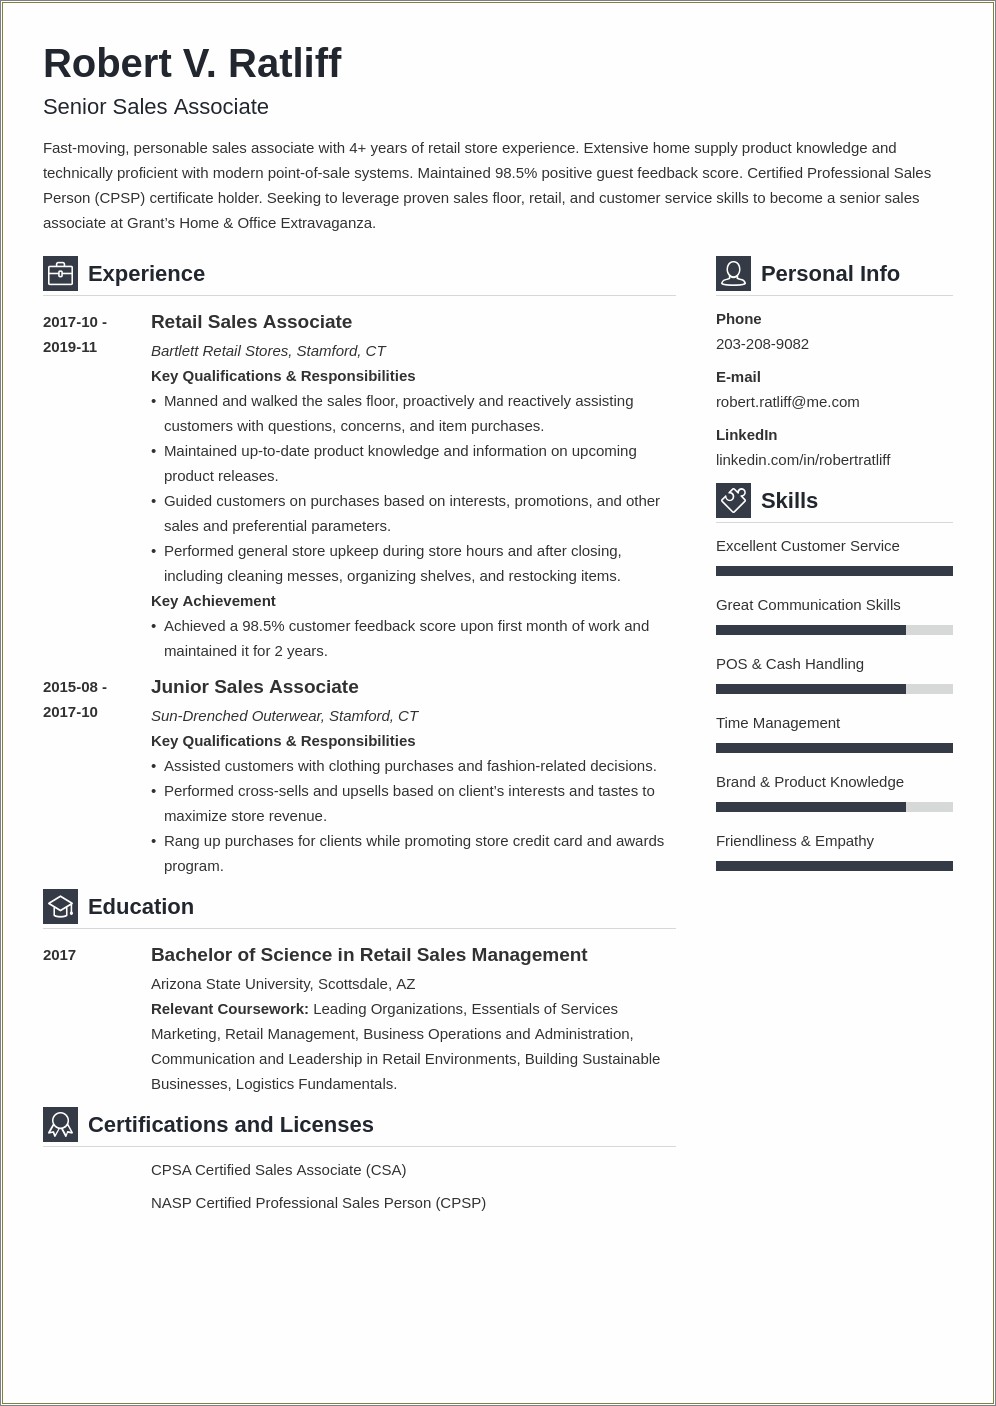 Sample Resume For Sales Associate With Experience